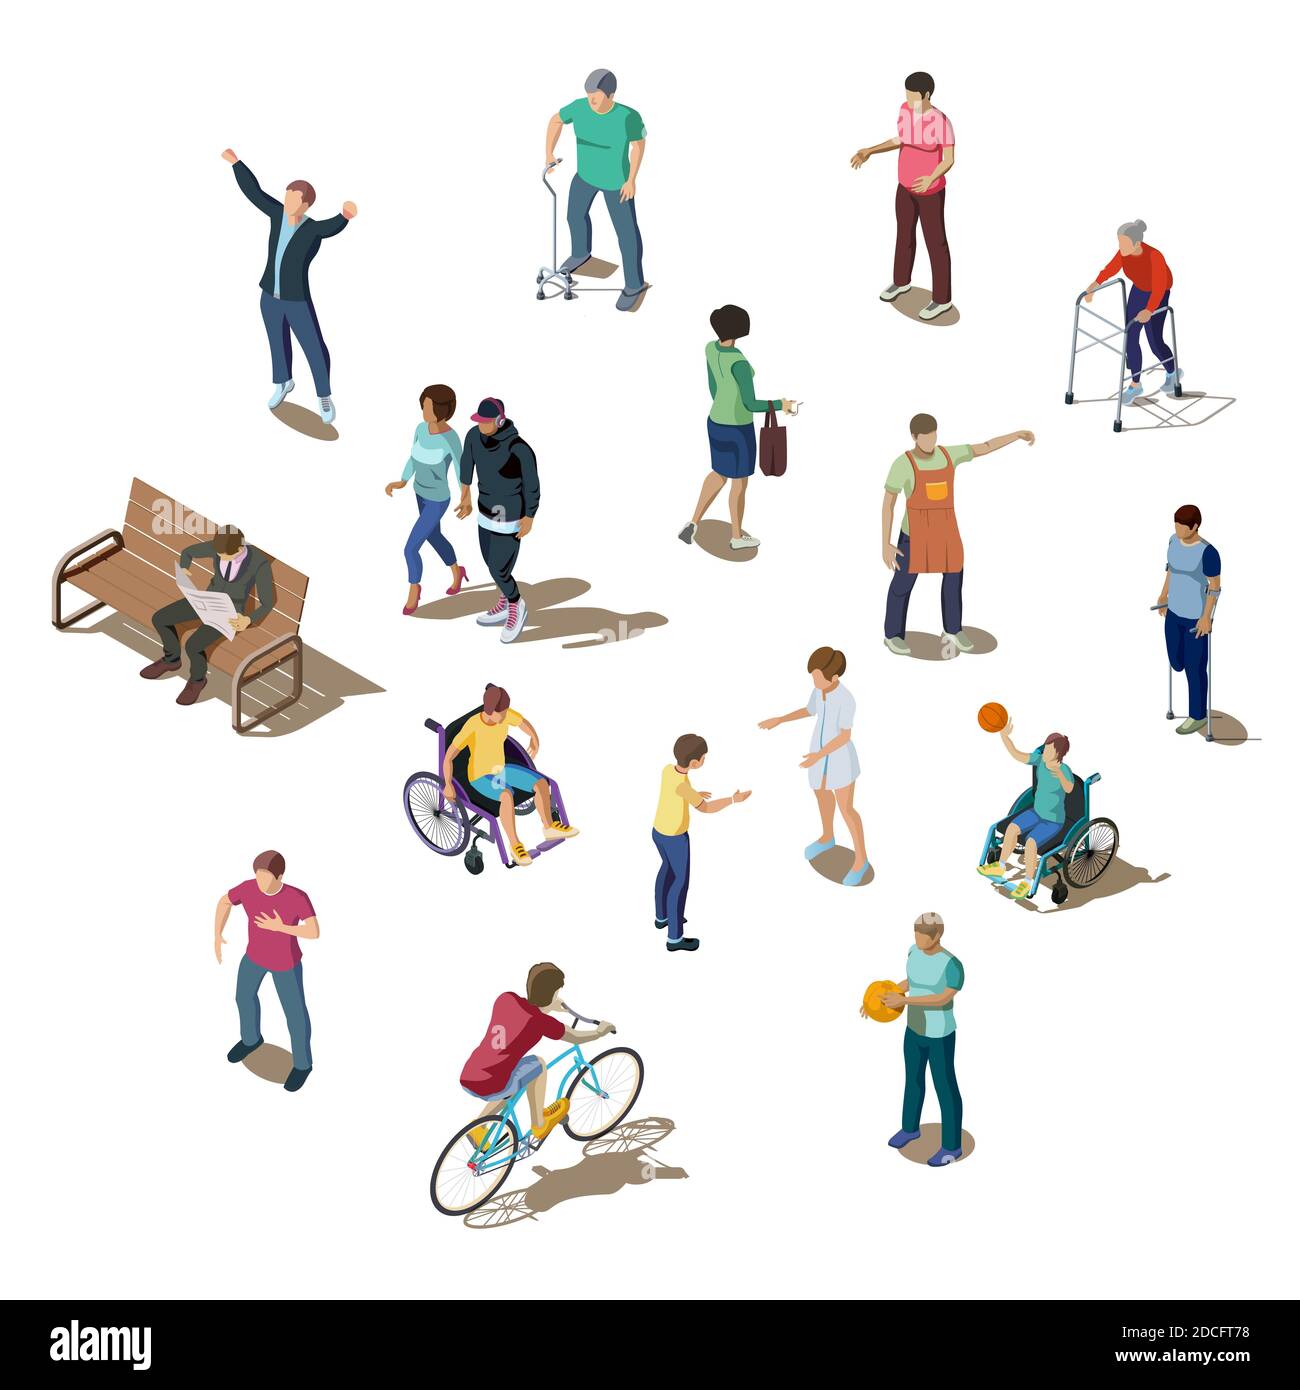 Isometric 3d set of different people. Young and old characters who walk, play, ride or communicate. Disabled humans are walking with walker, crutches, cane or on wheelchair. Businessman read newspaper Stock Vector